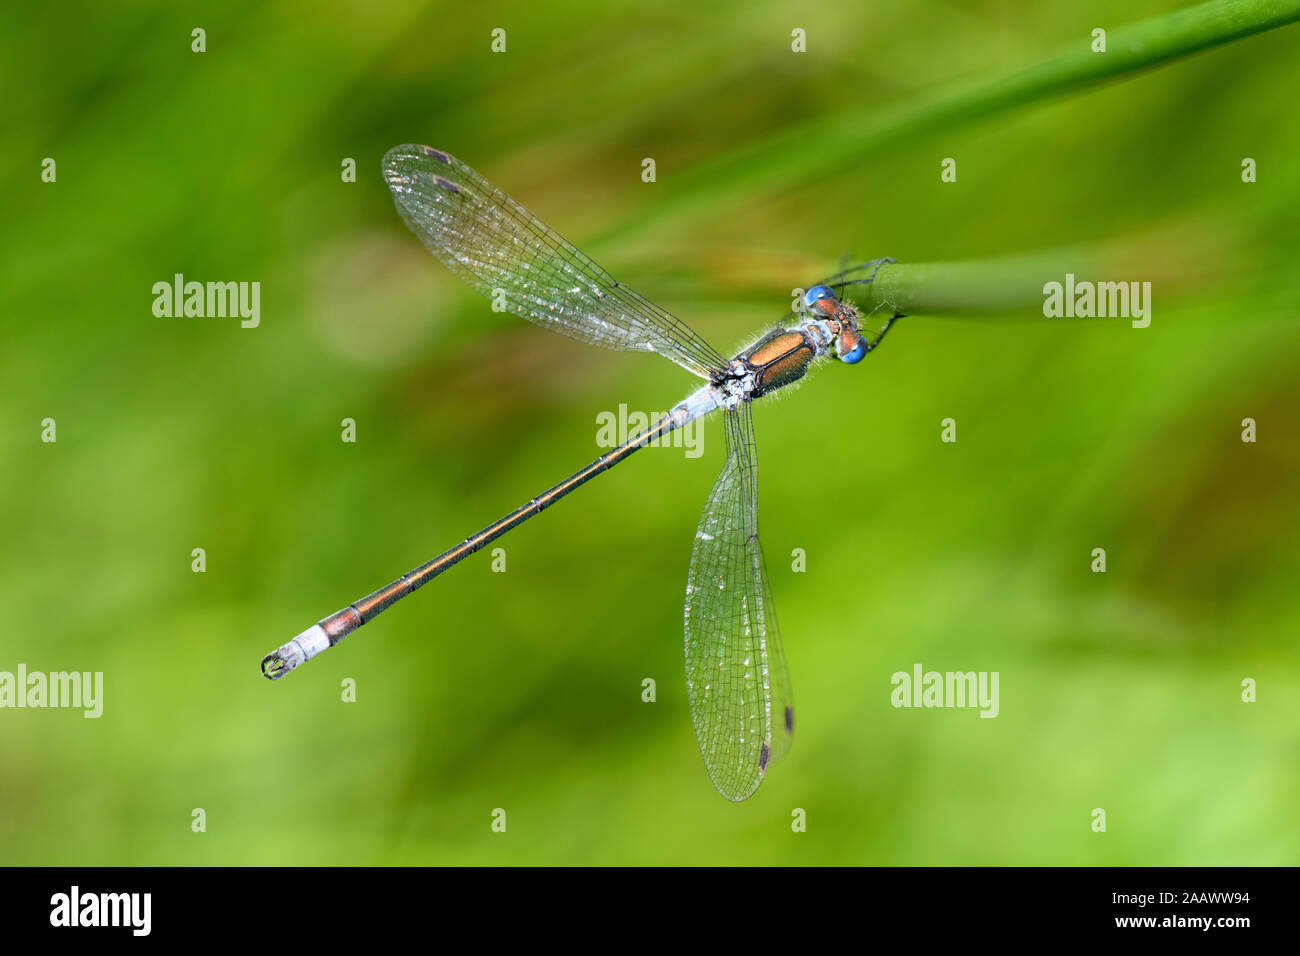 Close-up of male emerald damselfly on plant Stock Photo